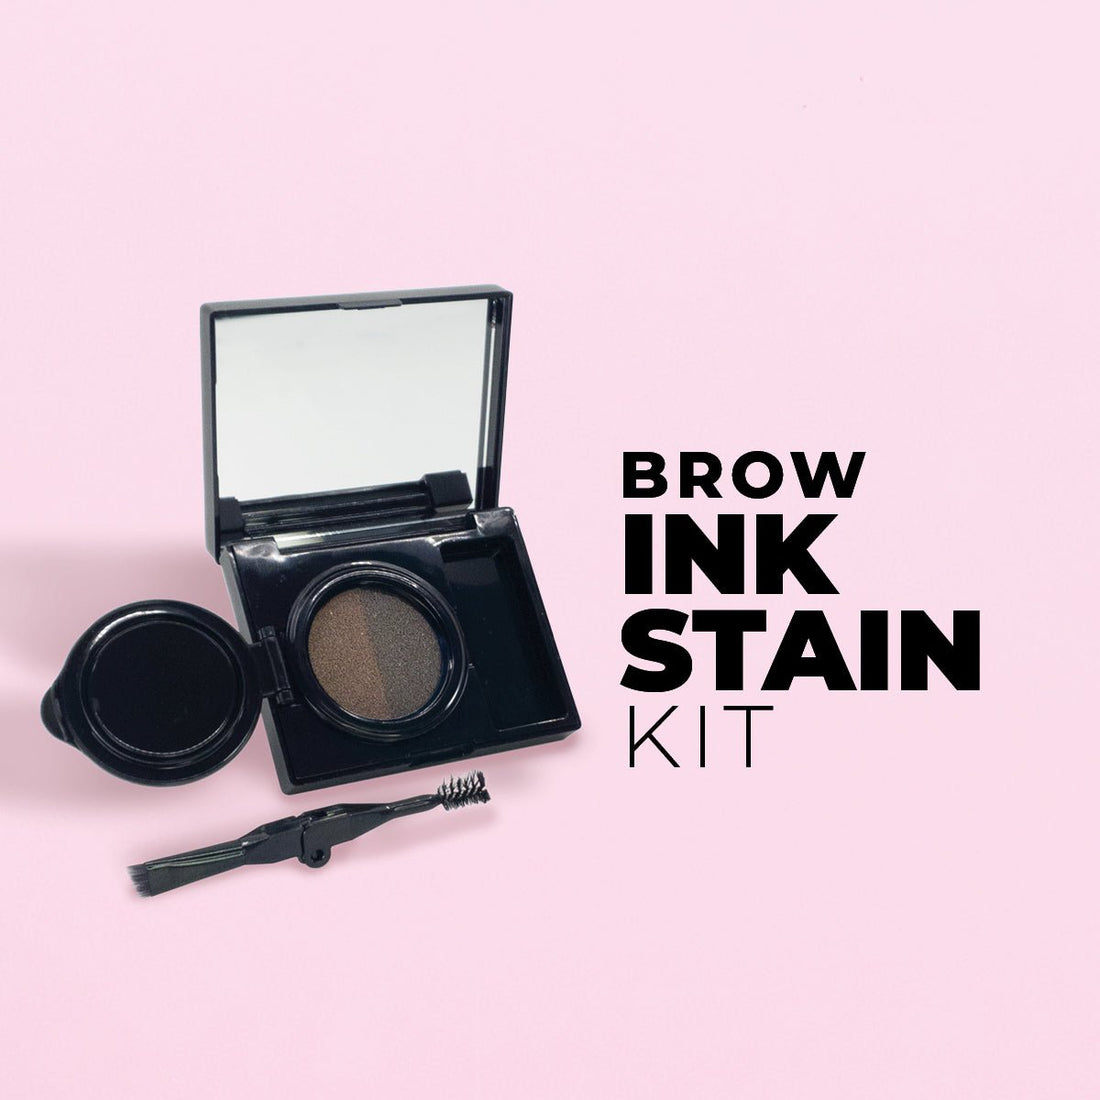 Brow Ink Stain Kit . Skin Care OneVSalon   